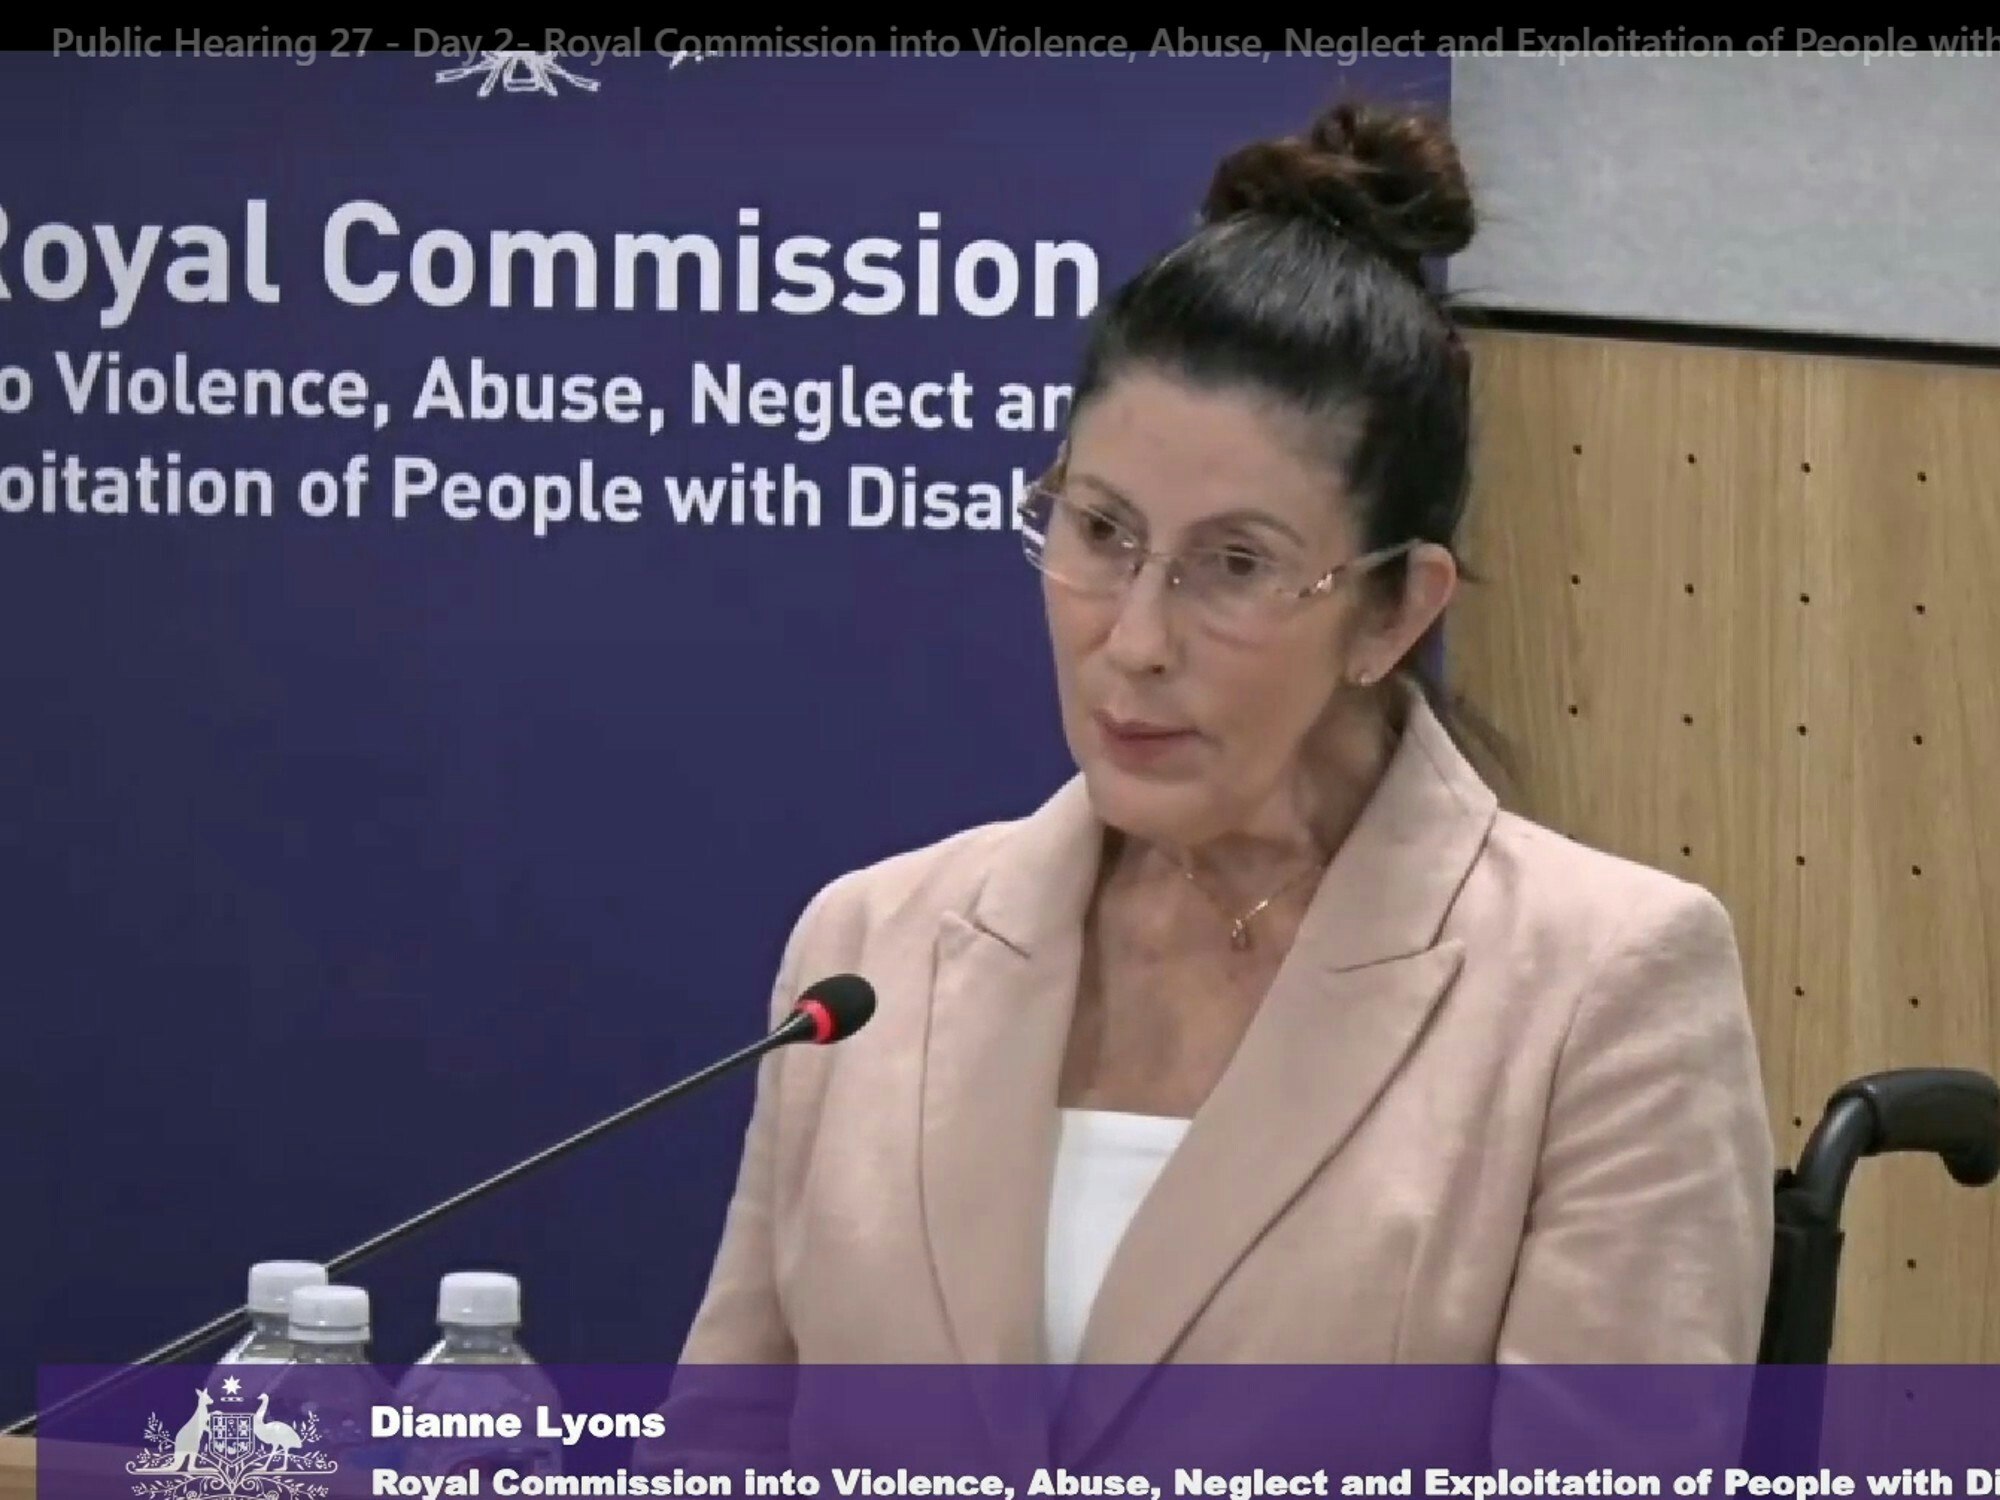 <p>Dianne Lyons has muscular dystrophy and spoke of her experiences while in prison. [Source: Livestream]</p>
